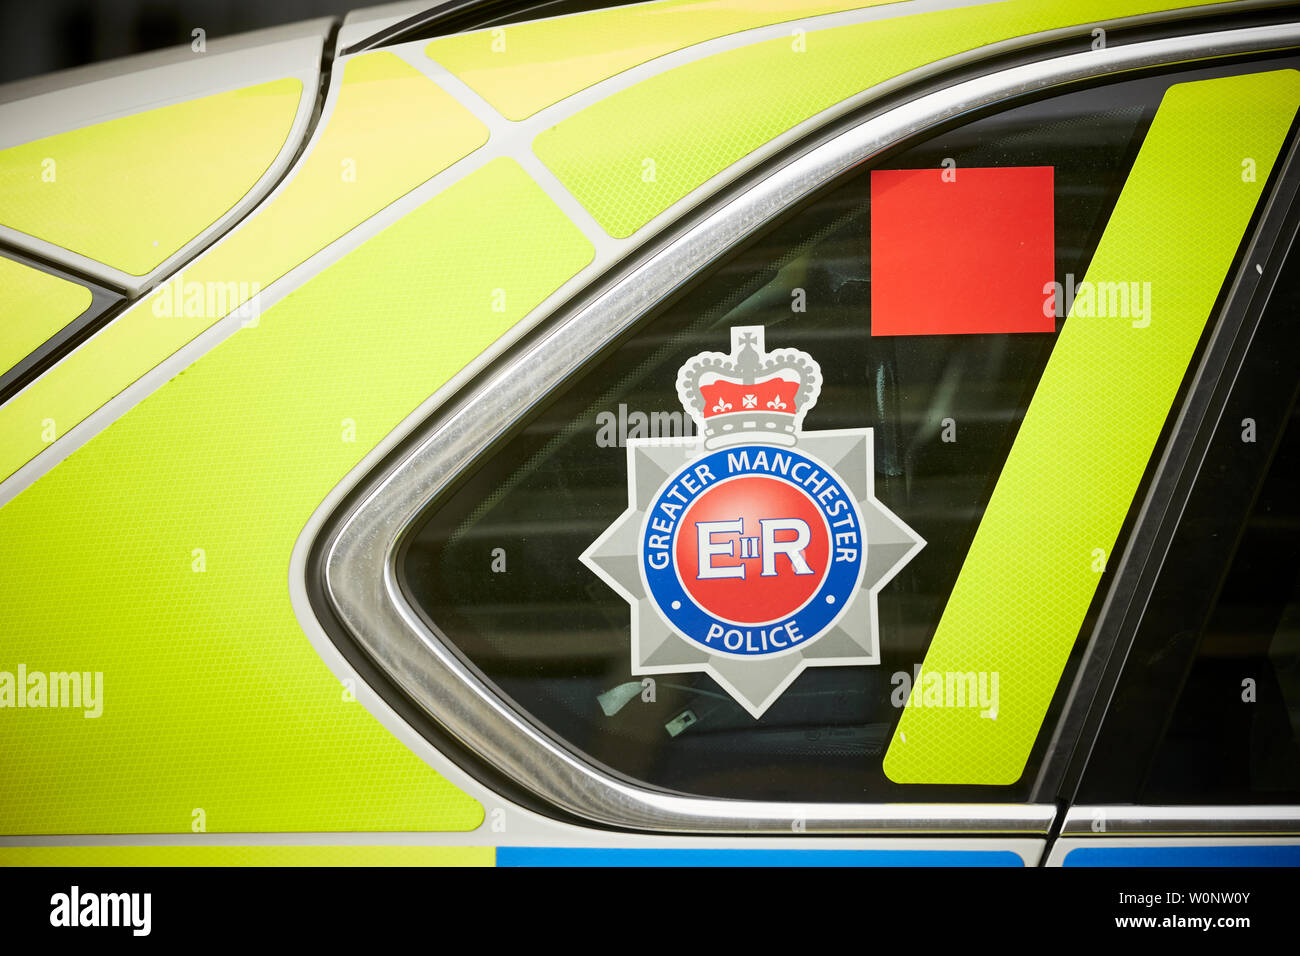 Manchester city centre, armed police BMW 4x4 livery police cars Stock Photo